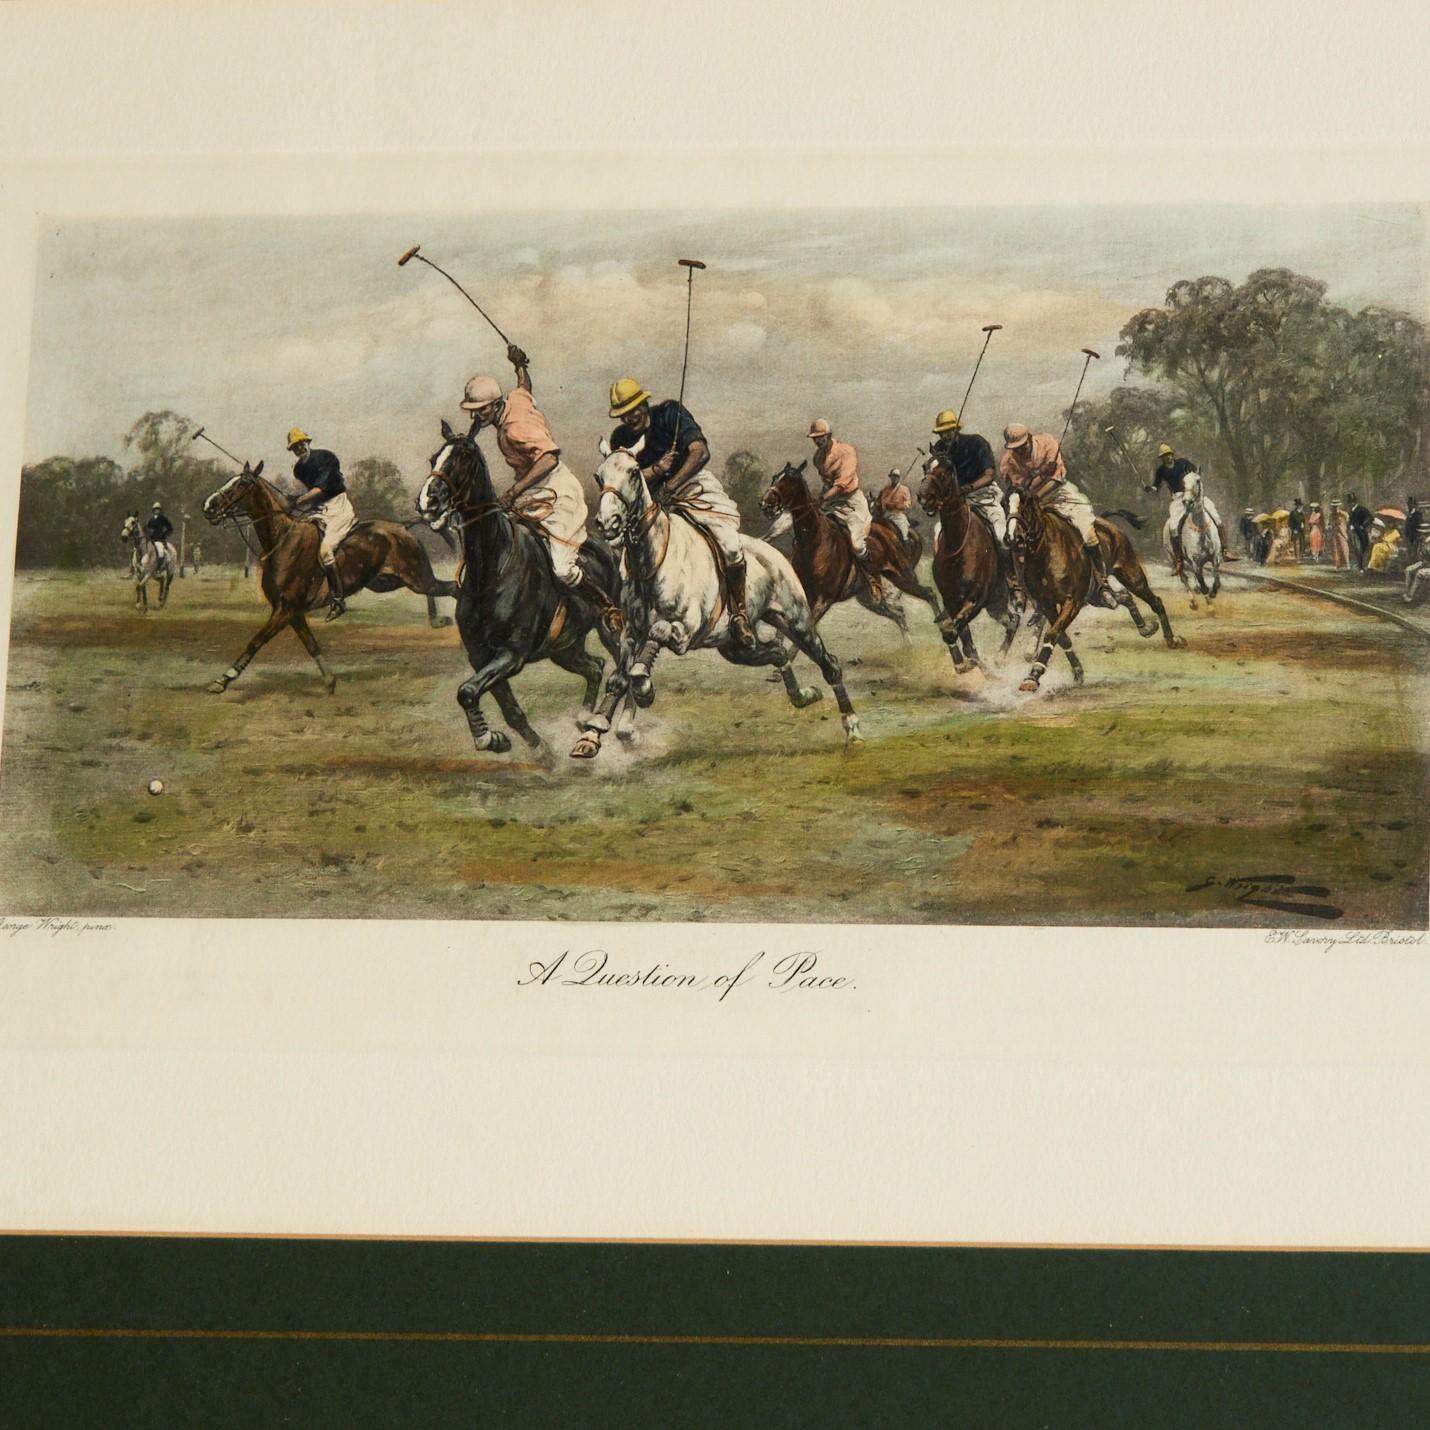 C. 1900, After George Wright (British, 1860-1944), hand-colored etchings of polo playing. Published by E.W. Savory, Ltd, Bristol, the set of 4 framed prints includes 